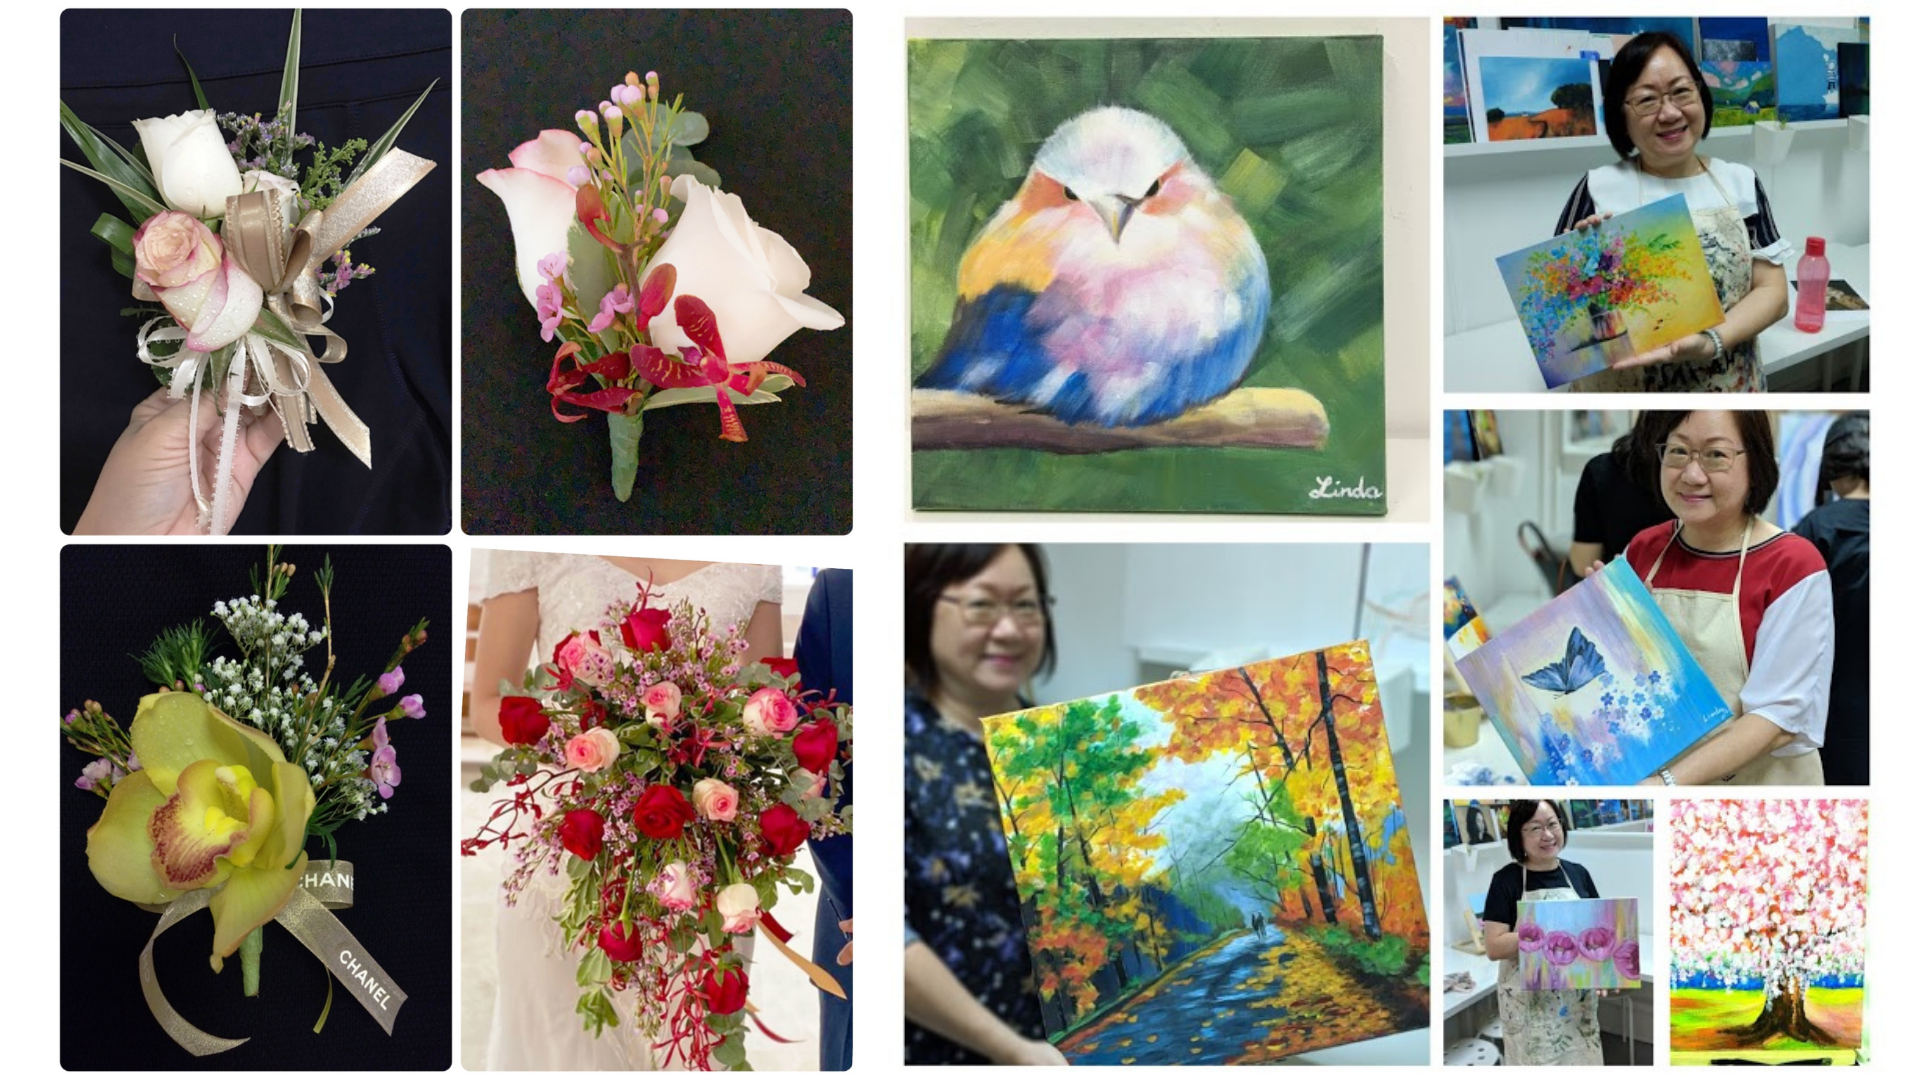 Ms Lai enjoys painting and floral arrangement in her free time